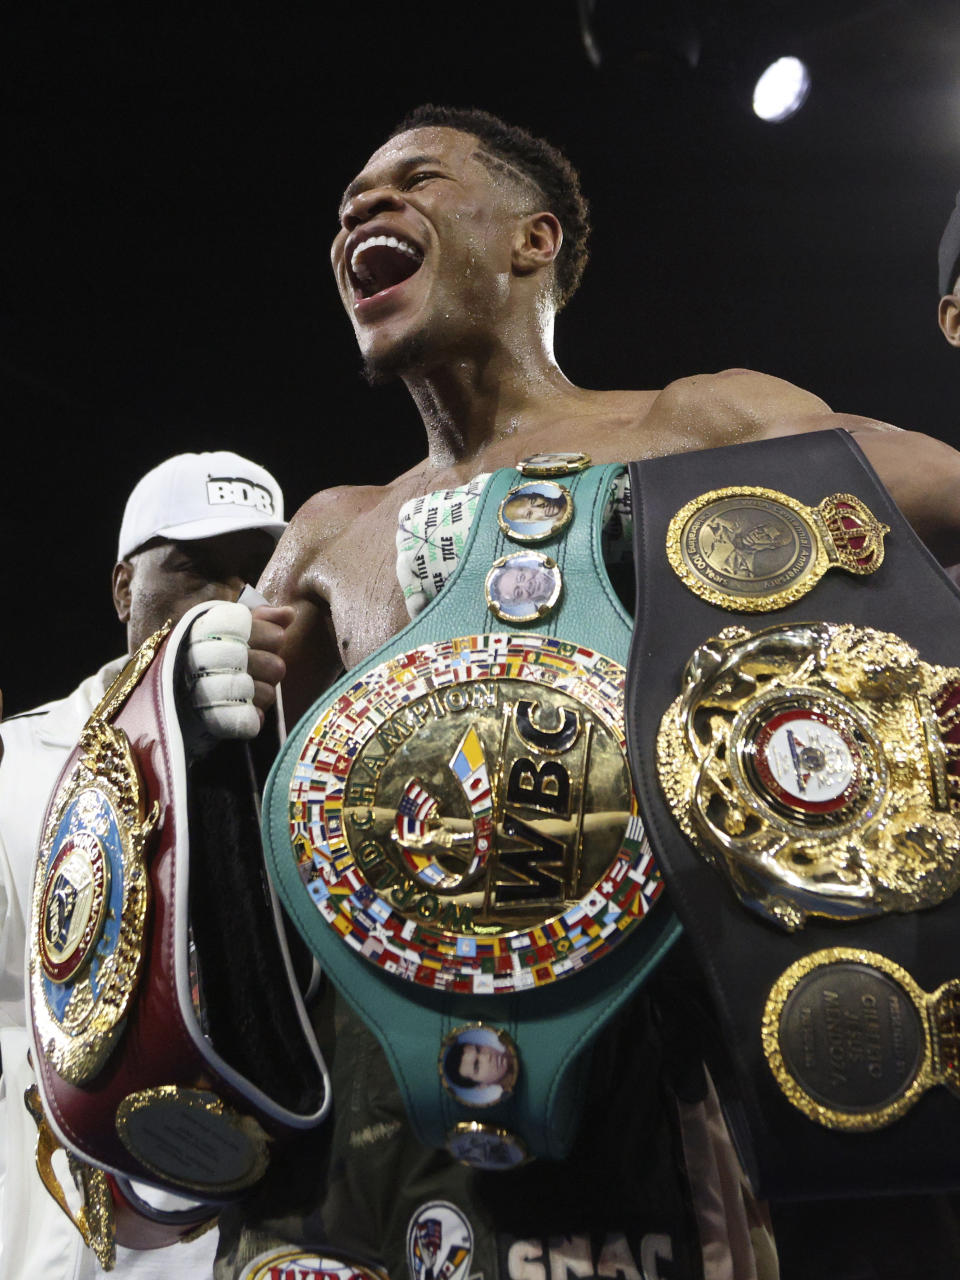 United States' Devin Haney displays his belts after defeating George Kambosos Jr. of Australia as Haney defends his undisputed lightweight boxing title in Melbourne, Sunday, Oct. 16, 2022. (AP Photo/Hamish Blair)